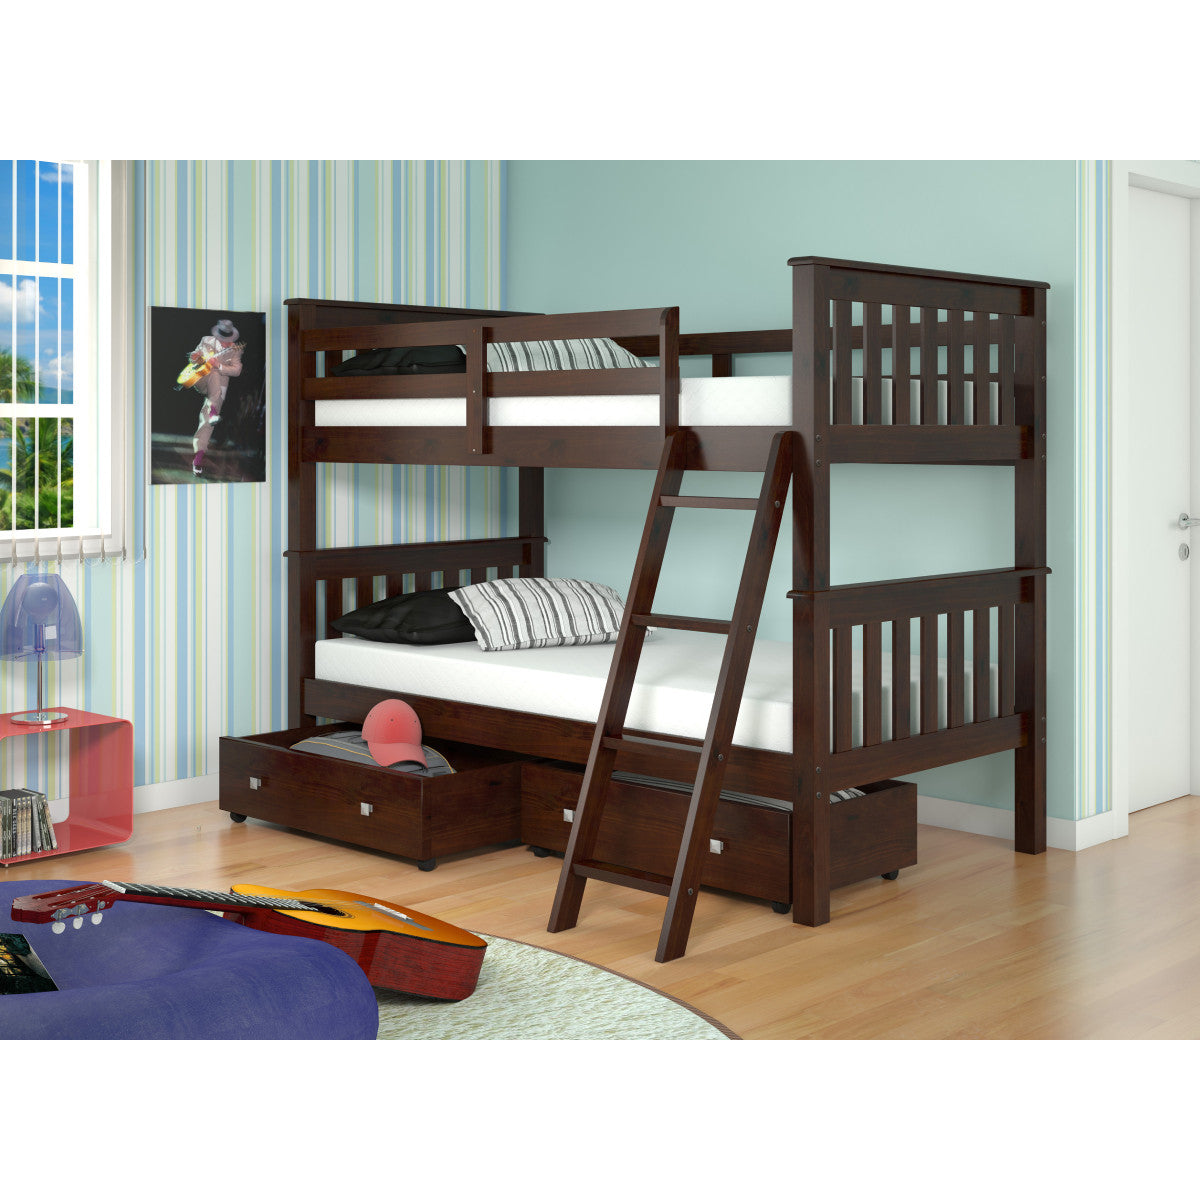 TWIN/TWIN MISSION BUNK BED W/DUAL UNDER BED DRAWERS DARK CAPPUCCINO